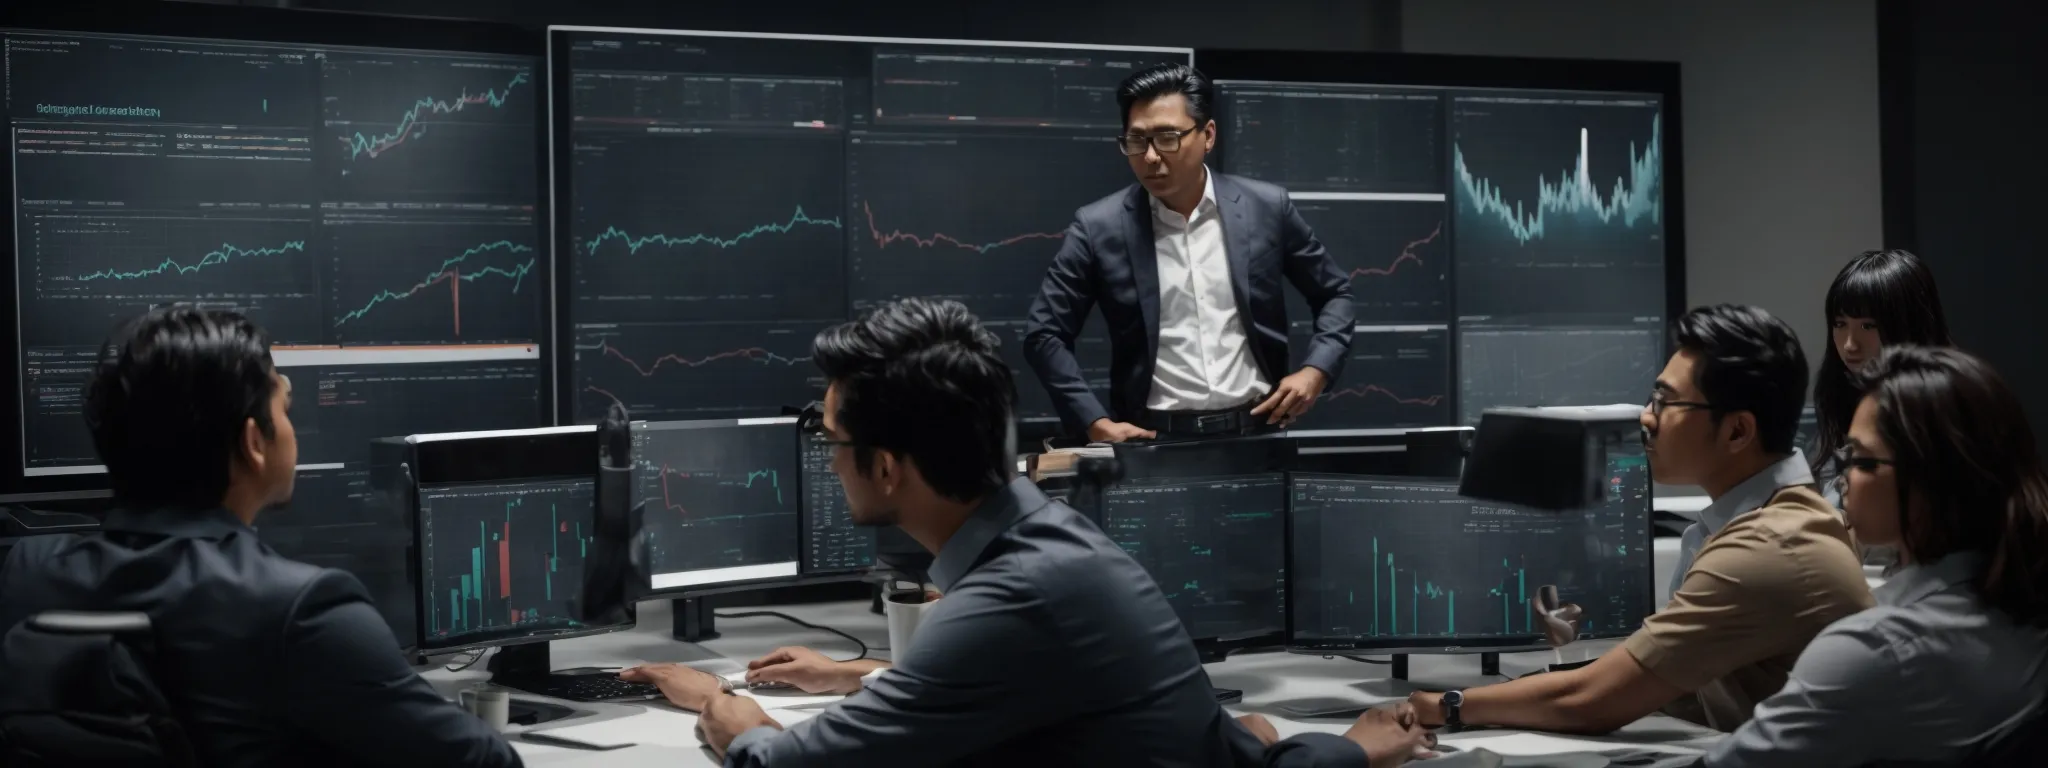 a group of marketing professionals analyzing graphs and charts on a computer monitor to assess seo strategy performance.